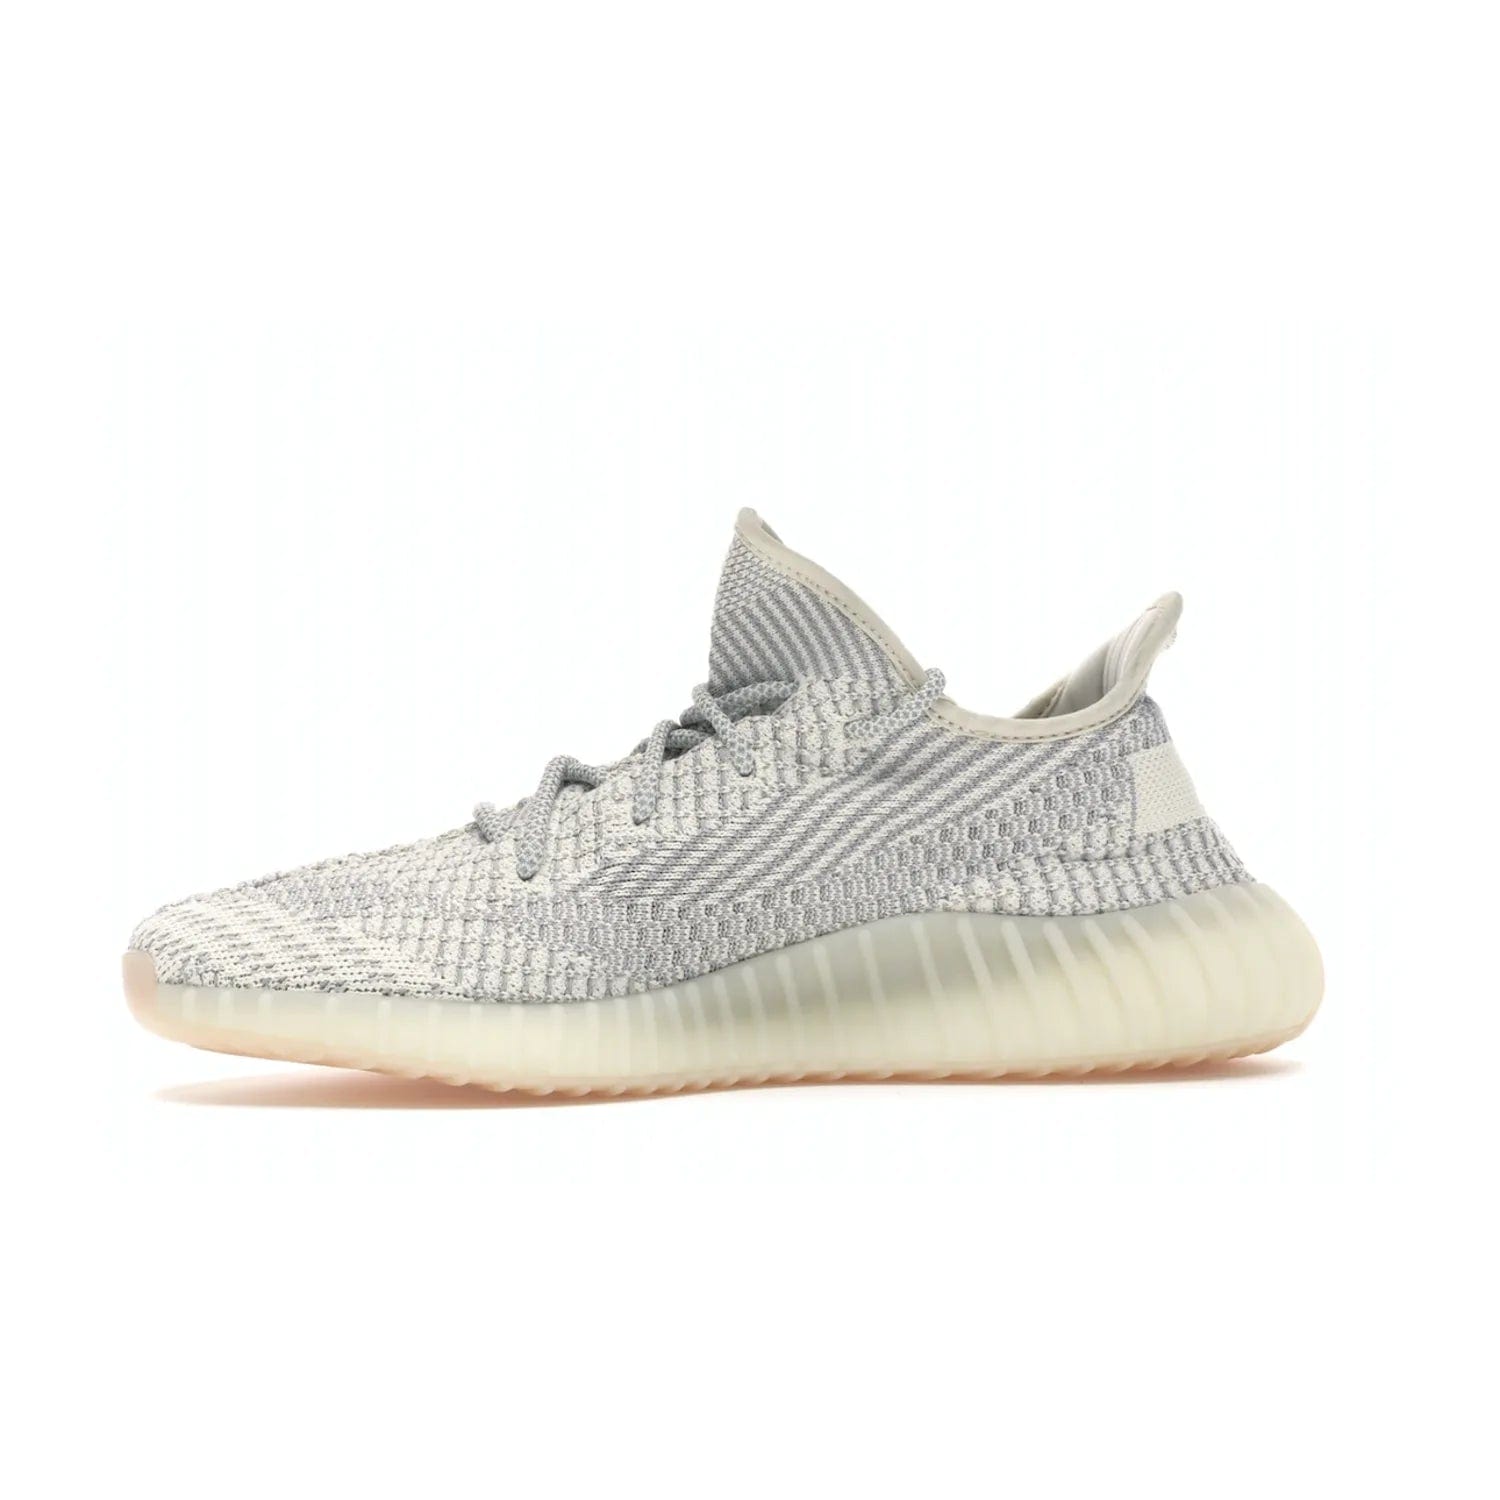 adidas Yeezy Boost 350 V2 Lundmark (Non Reflective) - Image 18 - Only at www.BallersClubKickz.com - Shop the exclusive adidas Yeezy Boost 350 V2 Lundmark with a subtle summer color, mesh upper, white-to-cream transitional midsole, light tan outsole, and pink middle stripe. Comfort and style come together in this perfect summer 350 V2. Released on July 11, 2019.